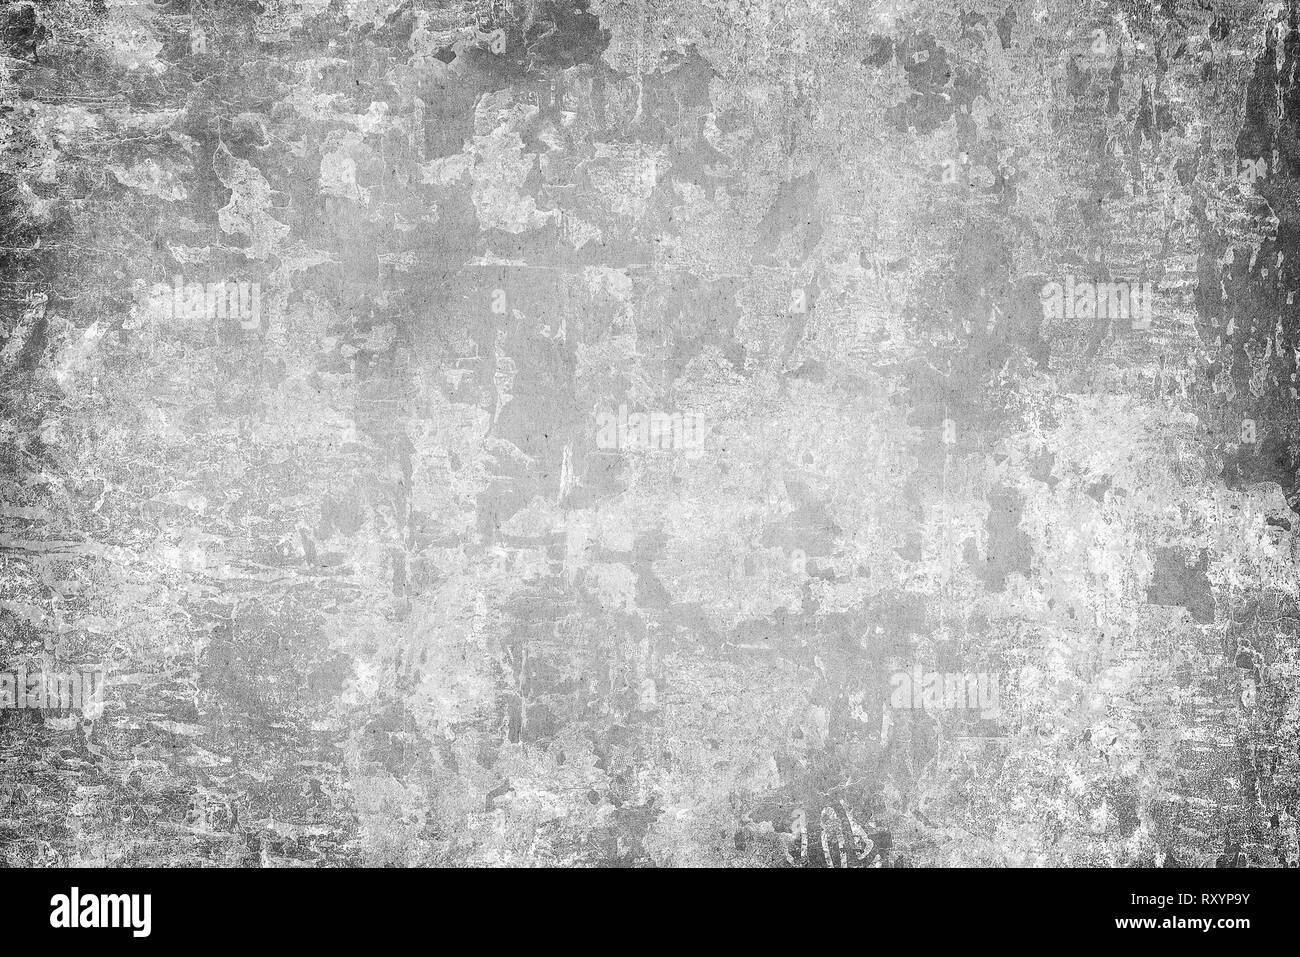 grunge background with space for text or image Stock Photo